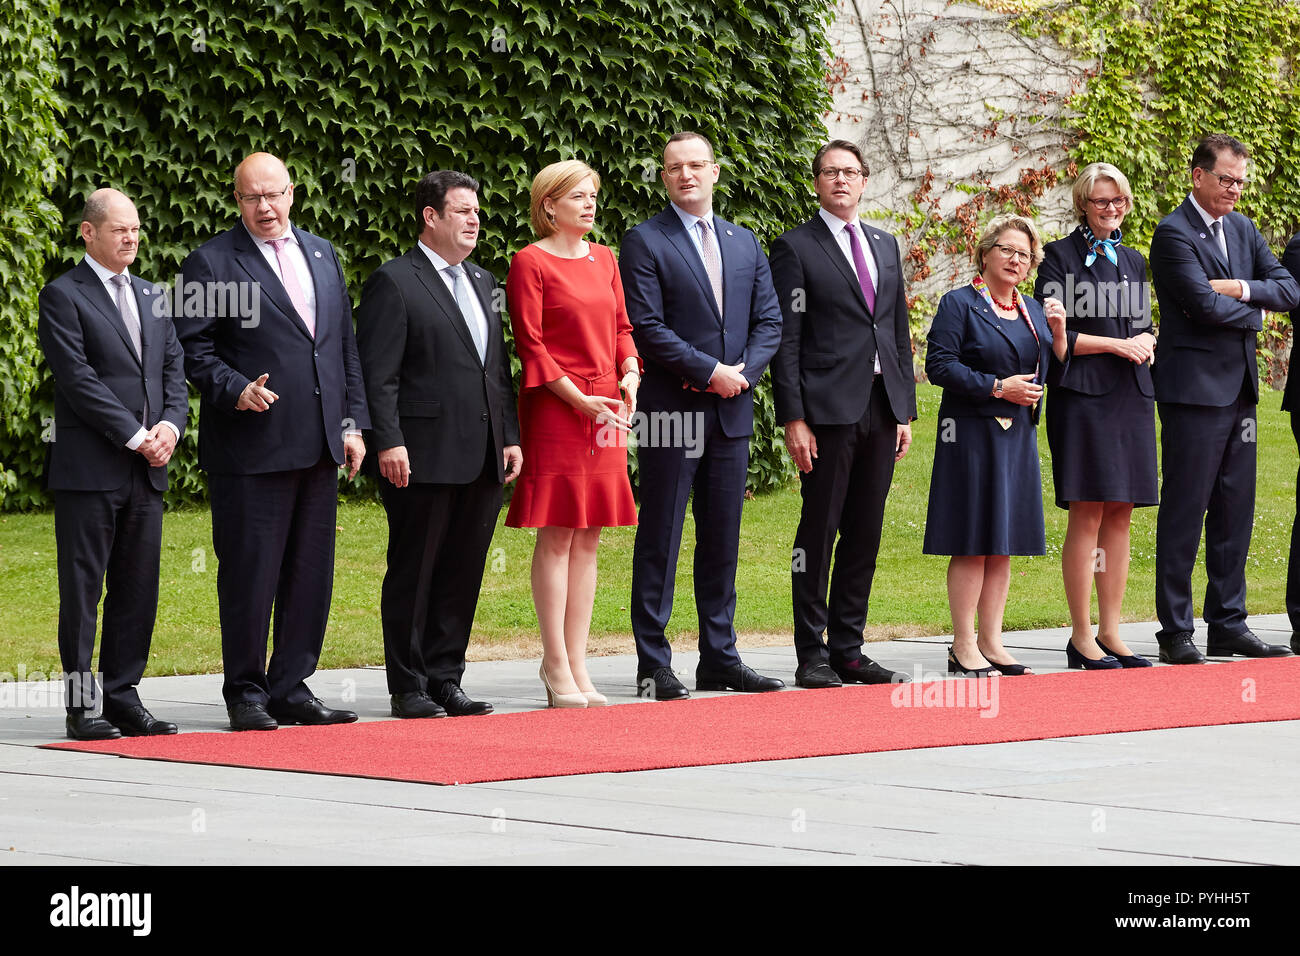 Berlin, Germany - The federal cabinet is standing on the red carpet during the state visit of the Chinese Prime Minister in the Federal Chancellery's courtyard of honour. Stock Photo